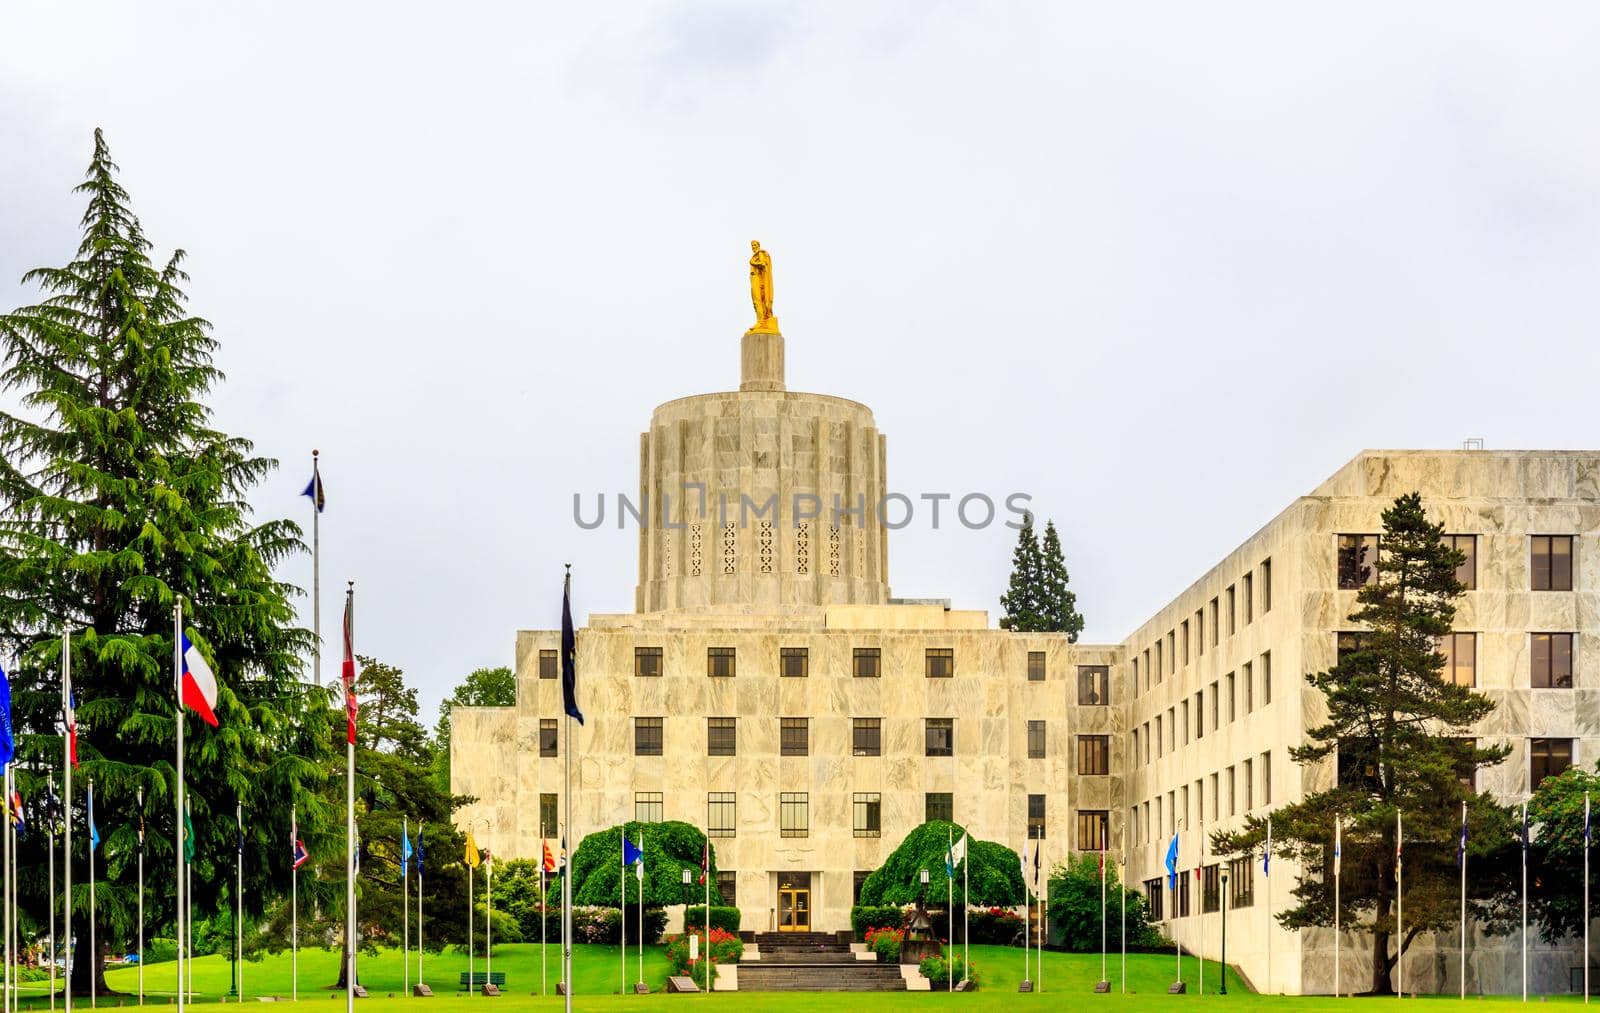 Salem, Oregon, United States - May 22, 2013: The Oregon Capitol Building shows the pioneer statue atop the capitol.